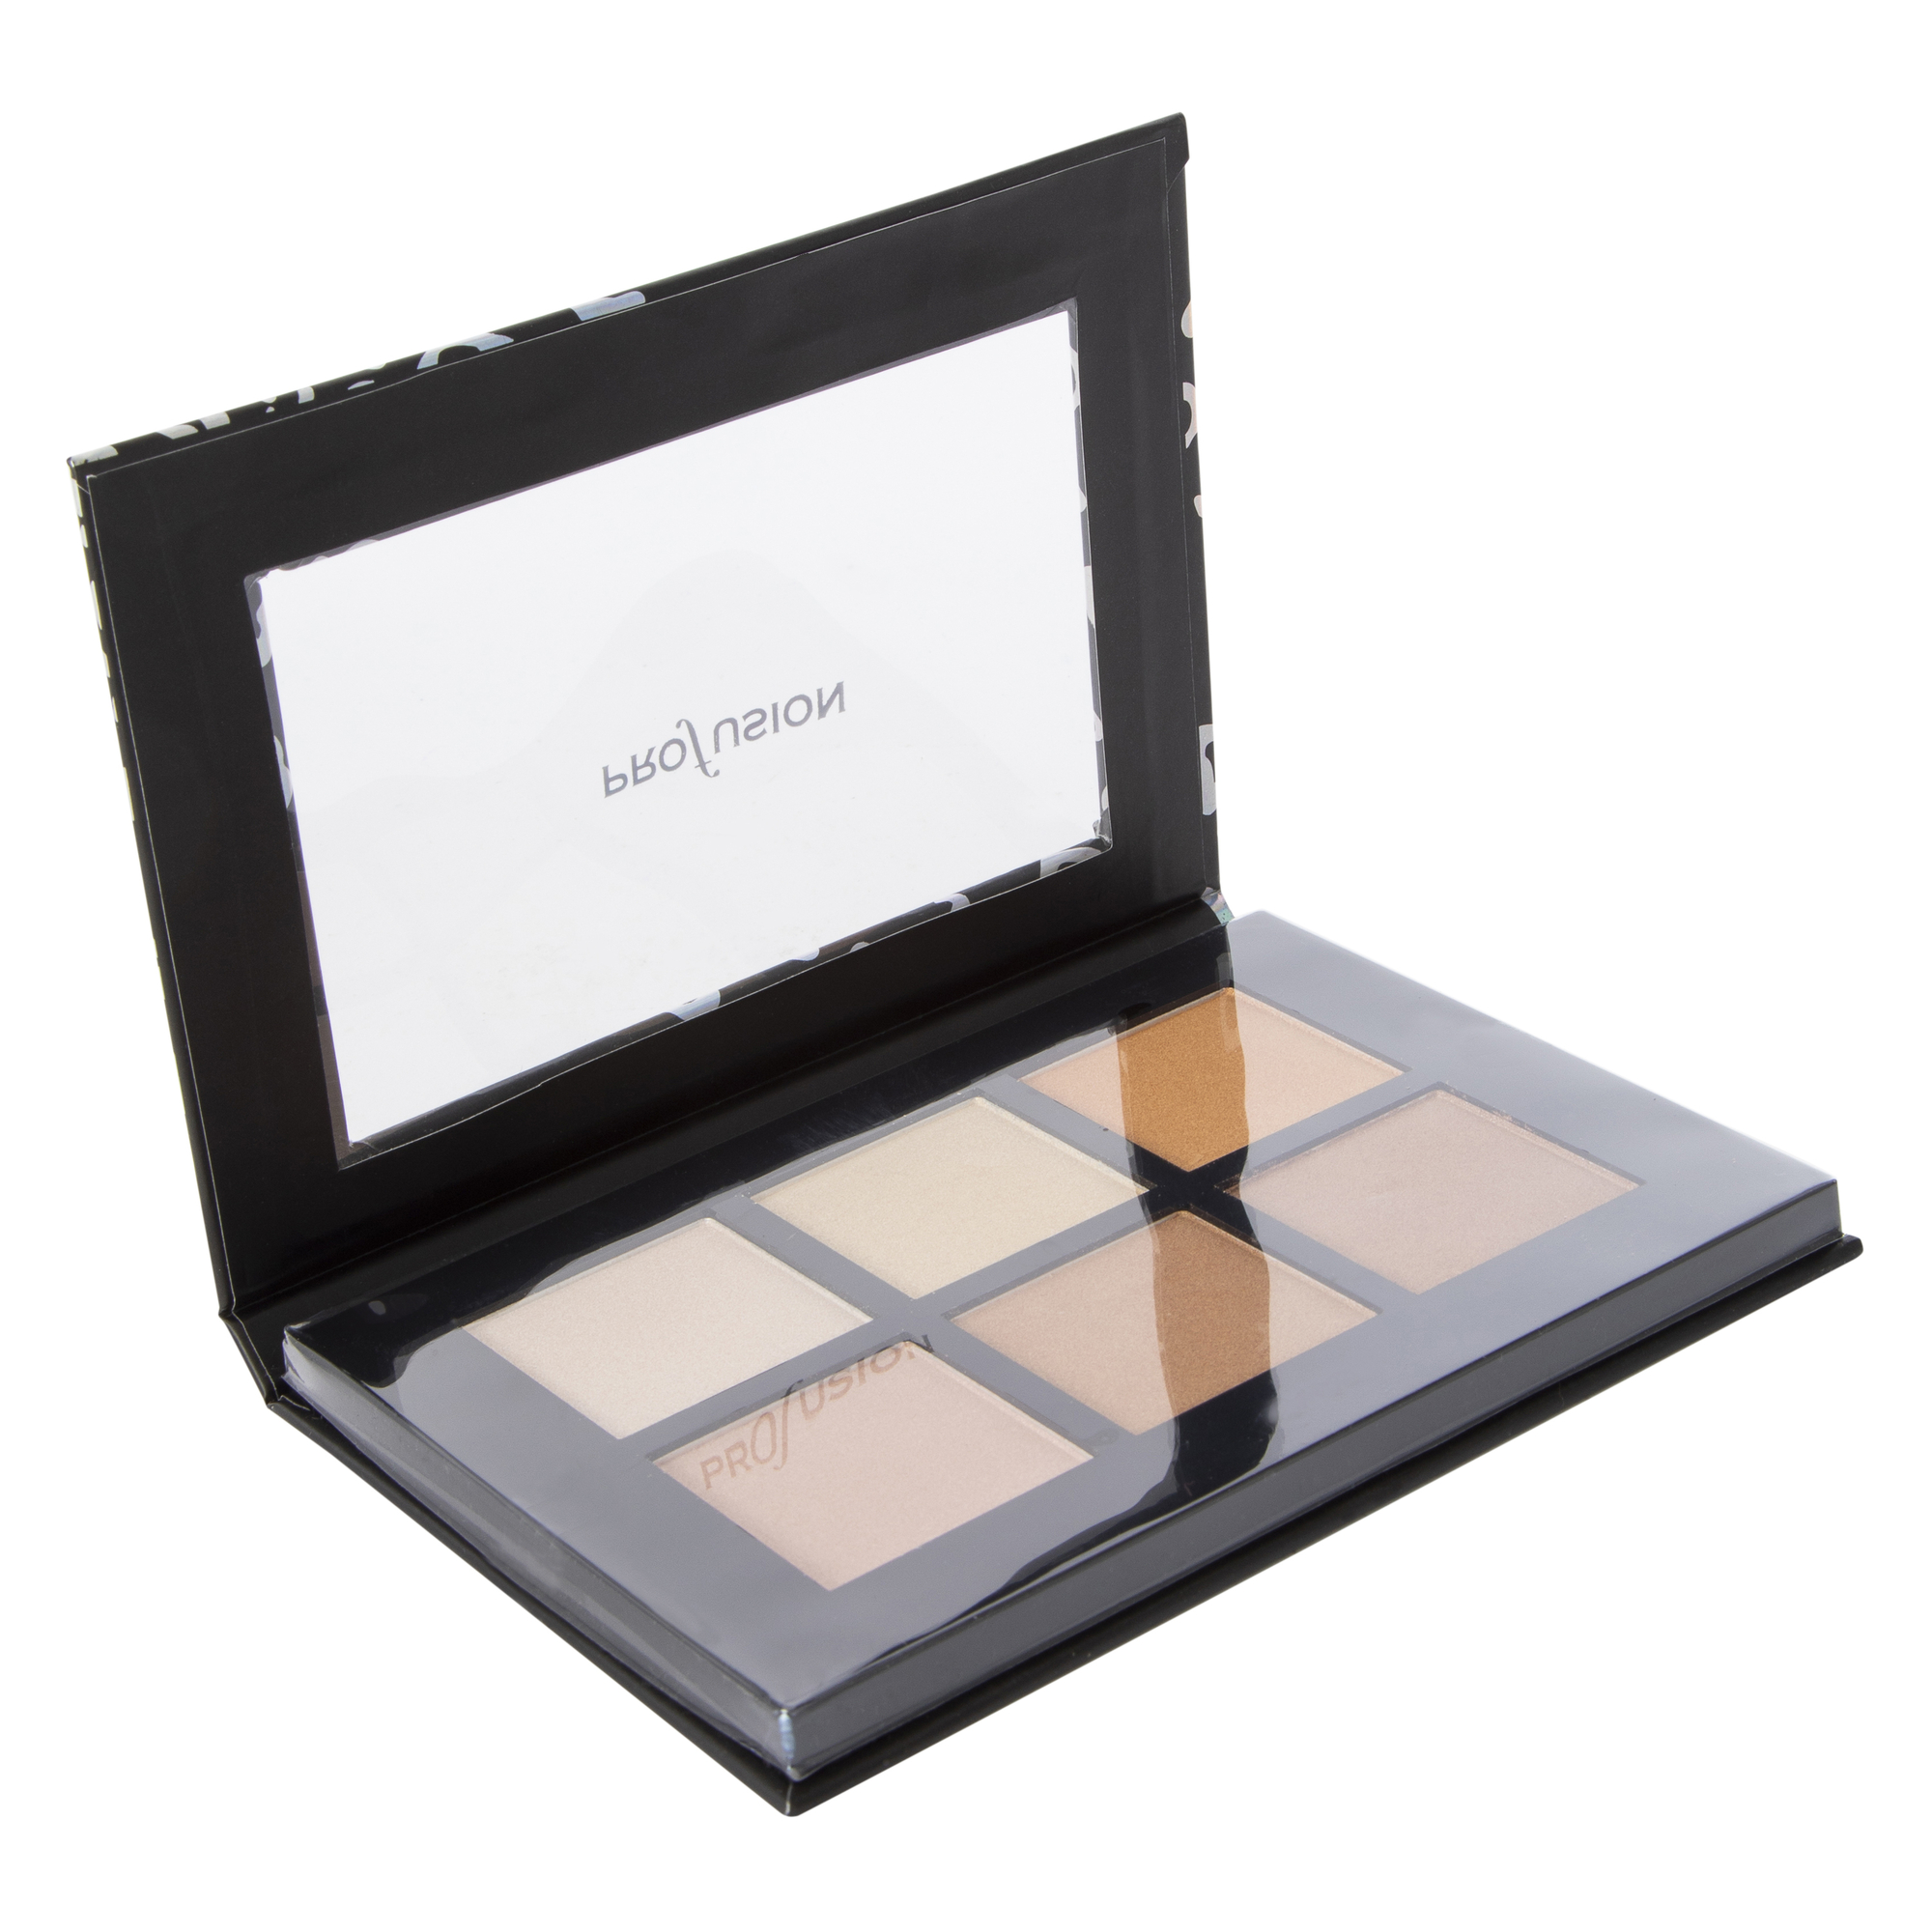 profusion highlighter palette 6-piece